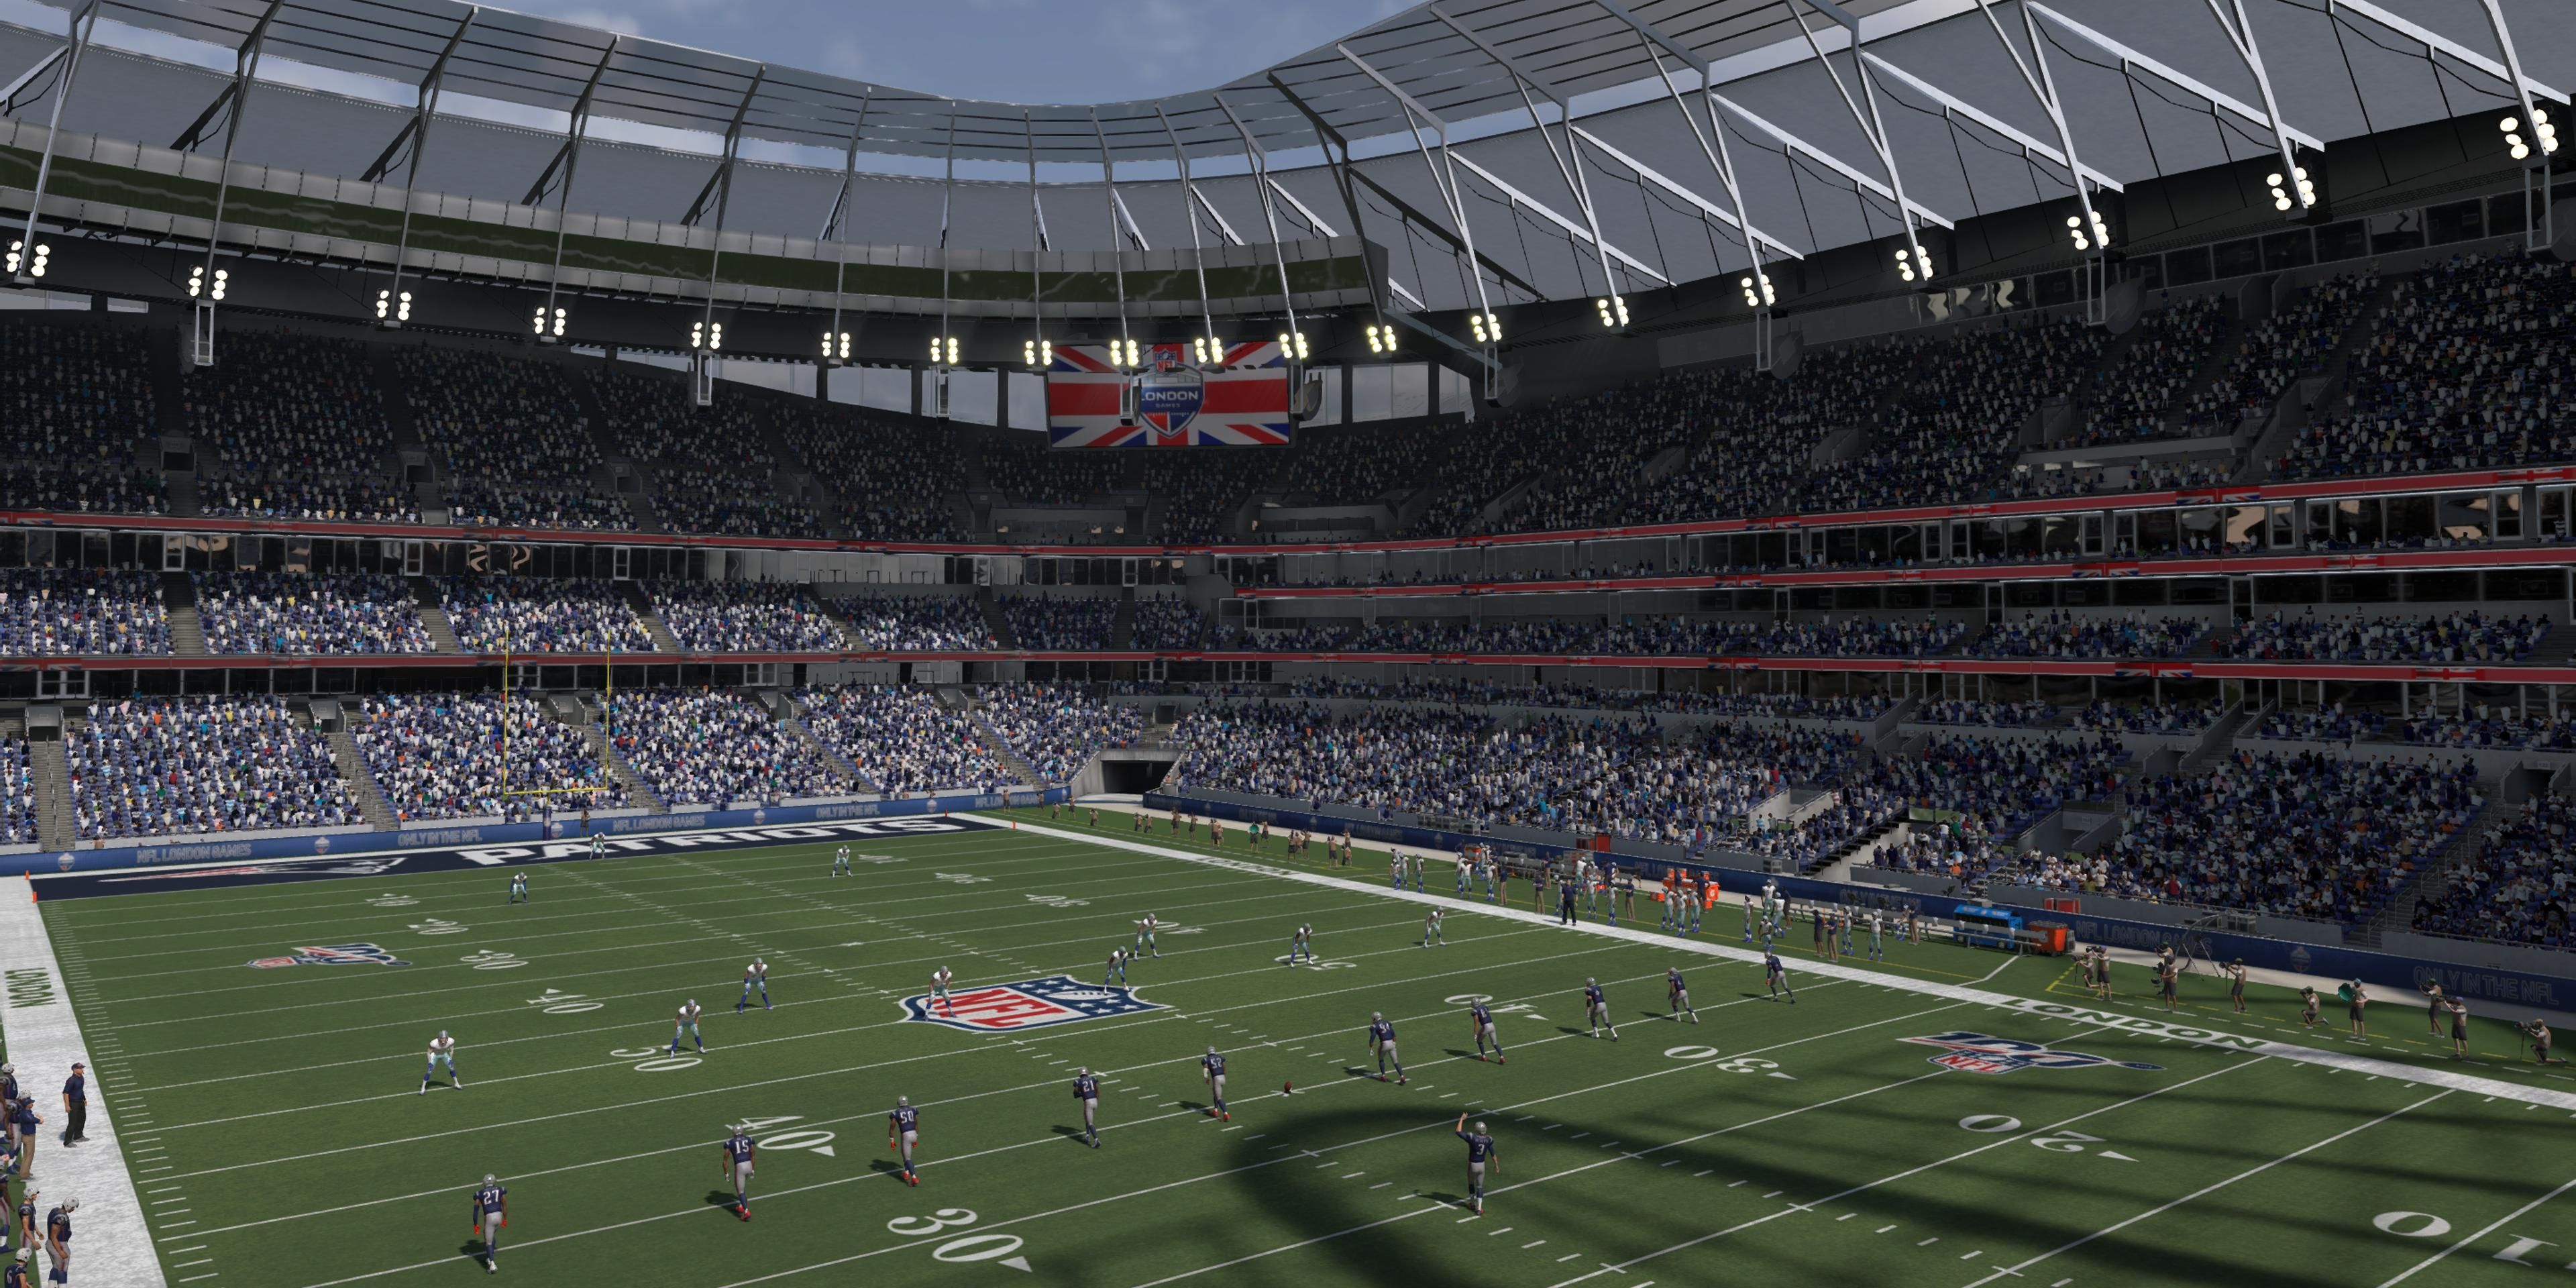 A Madden game being played in a UK stadium